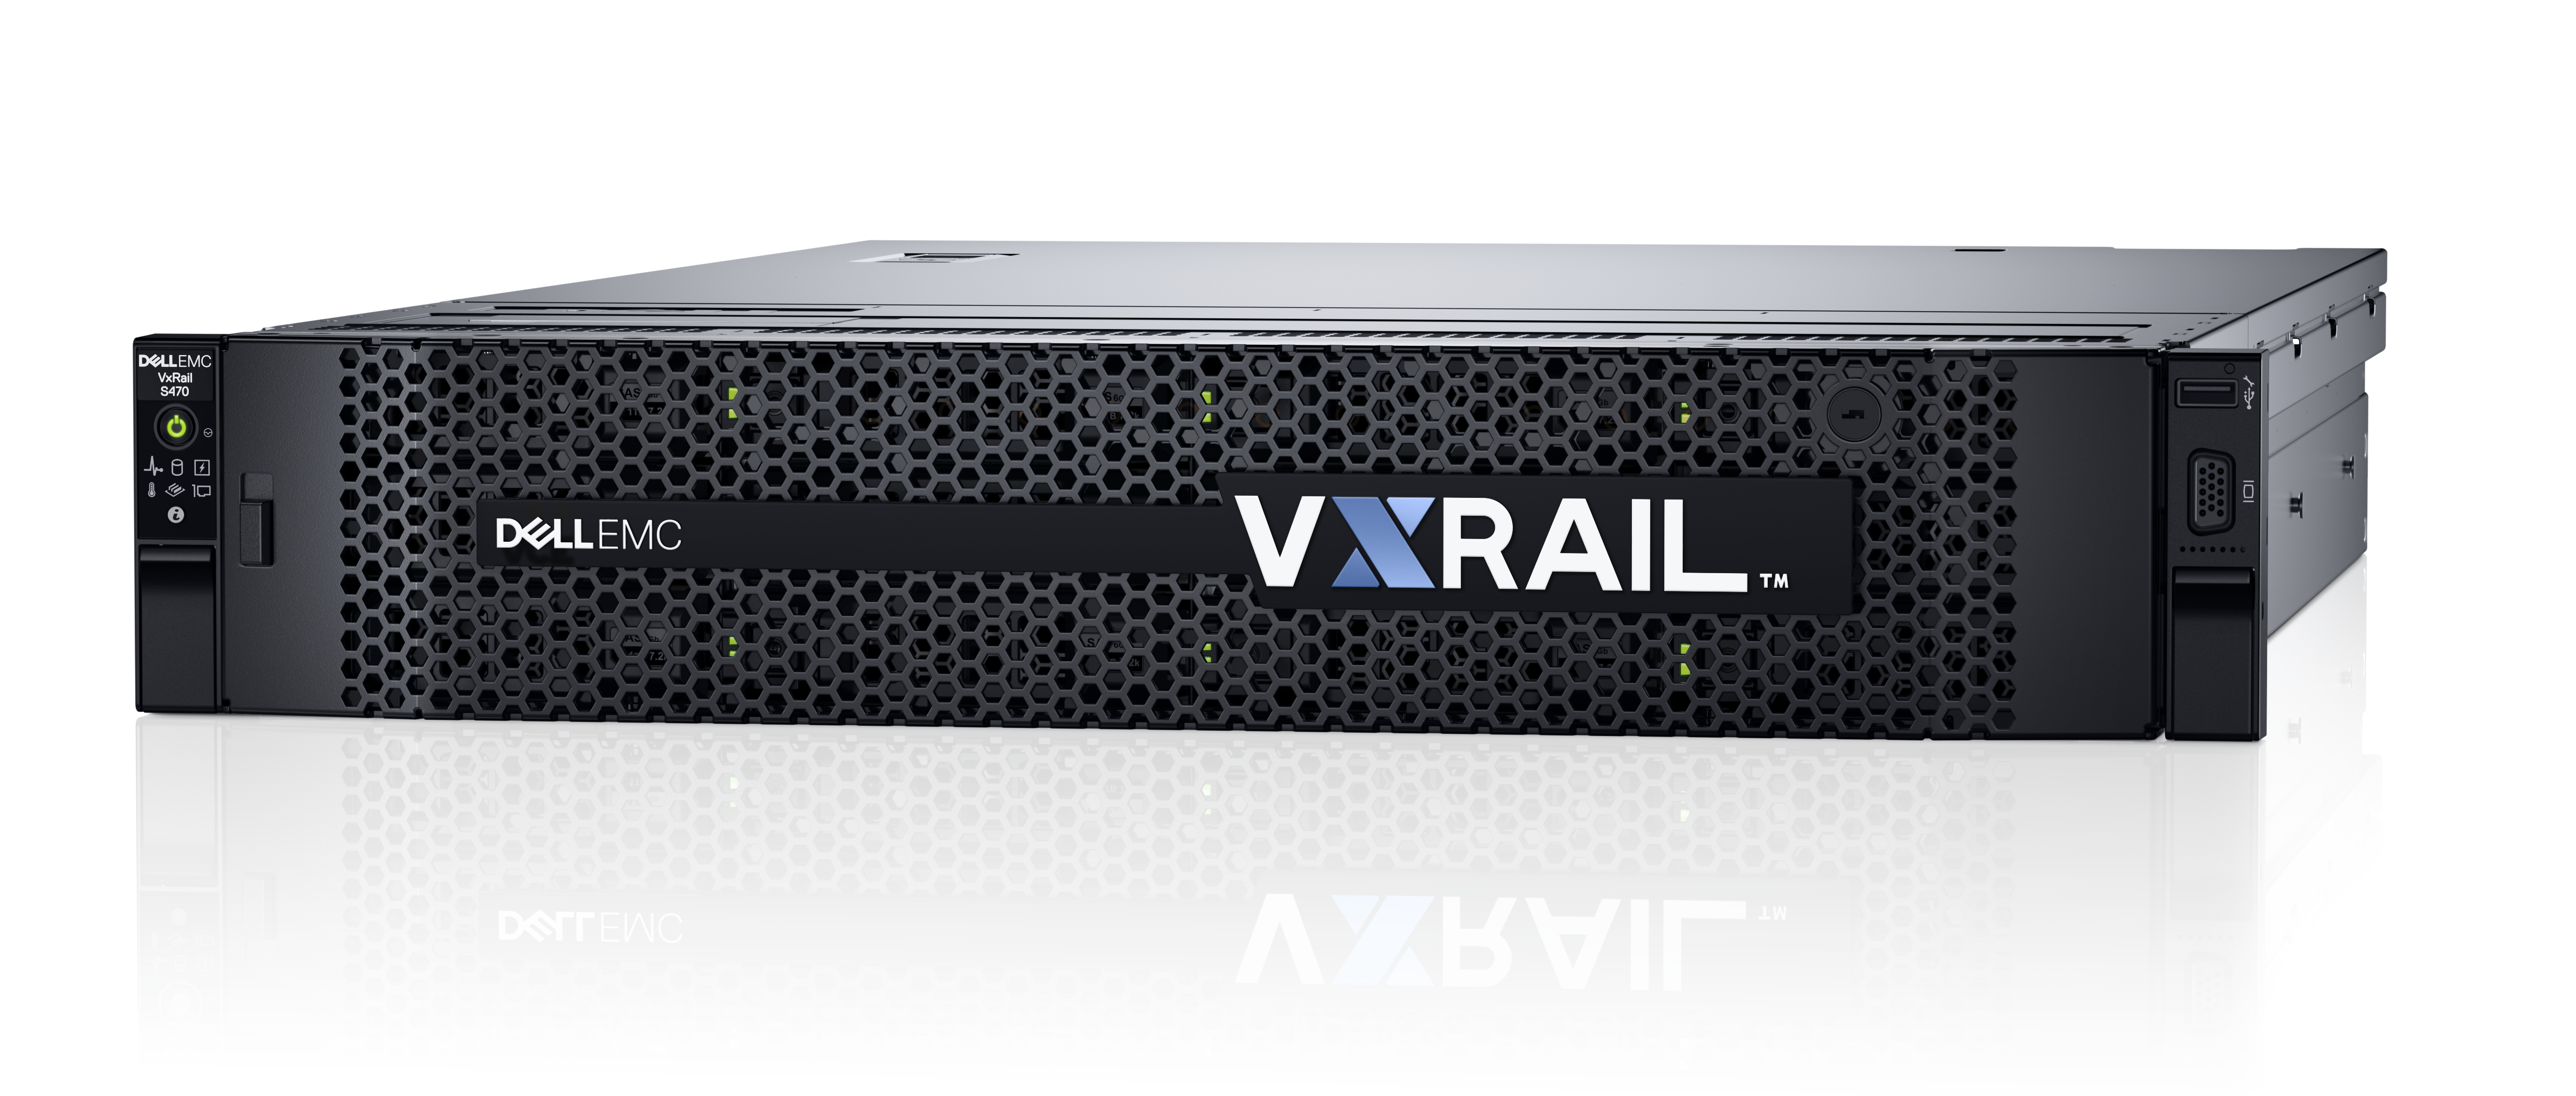 VxRail: The New Season of Infrastructure Deployment | Direct2DellEMC